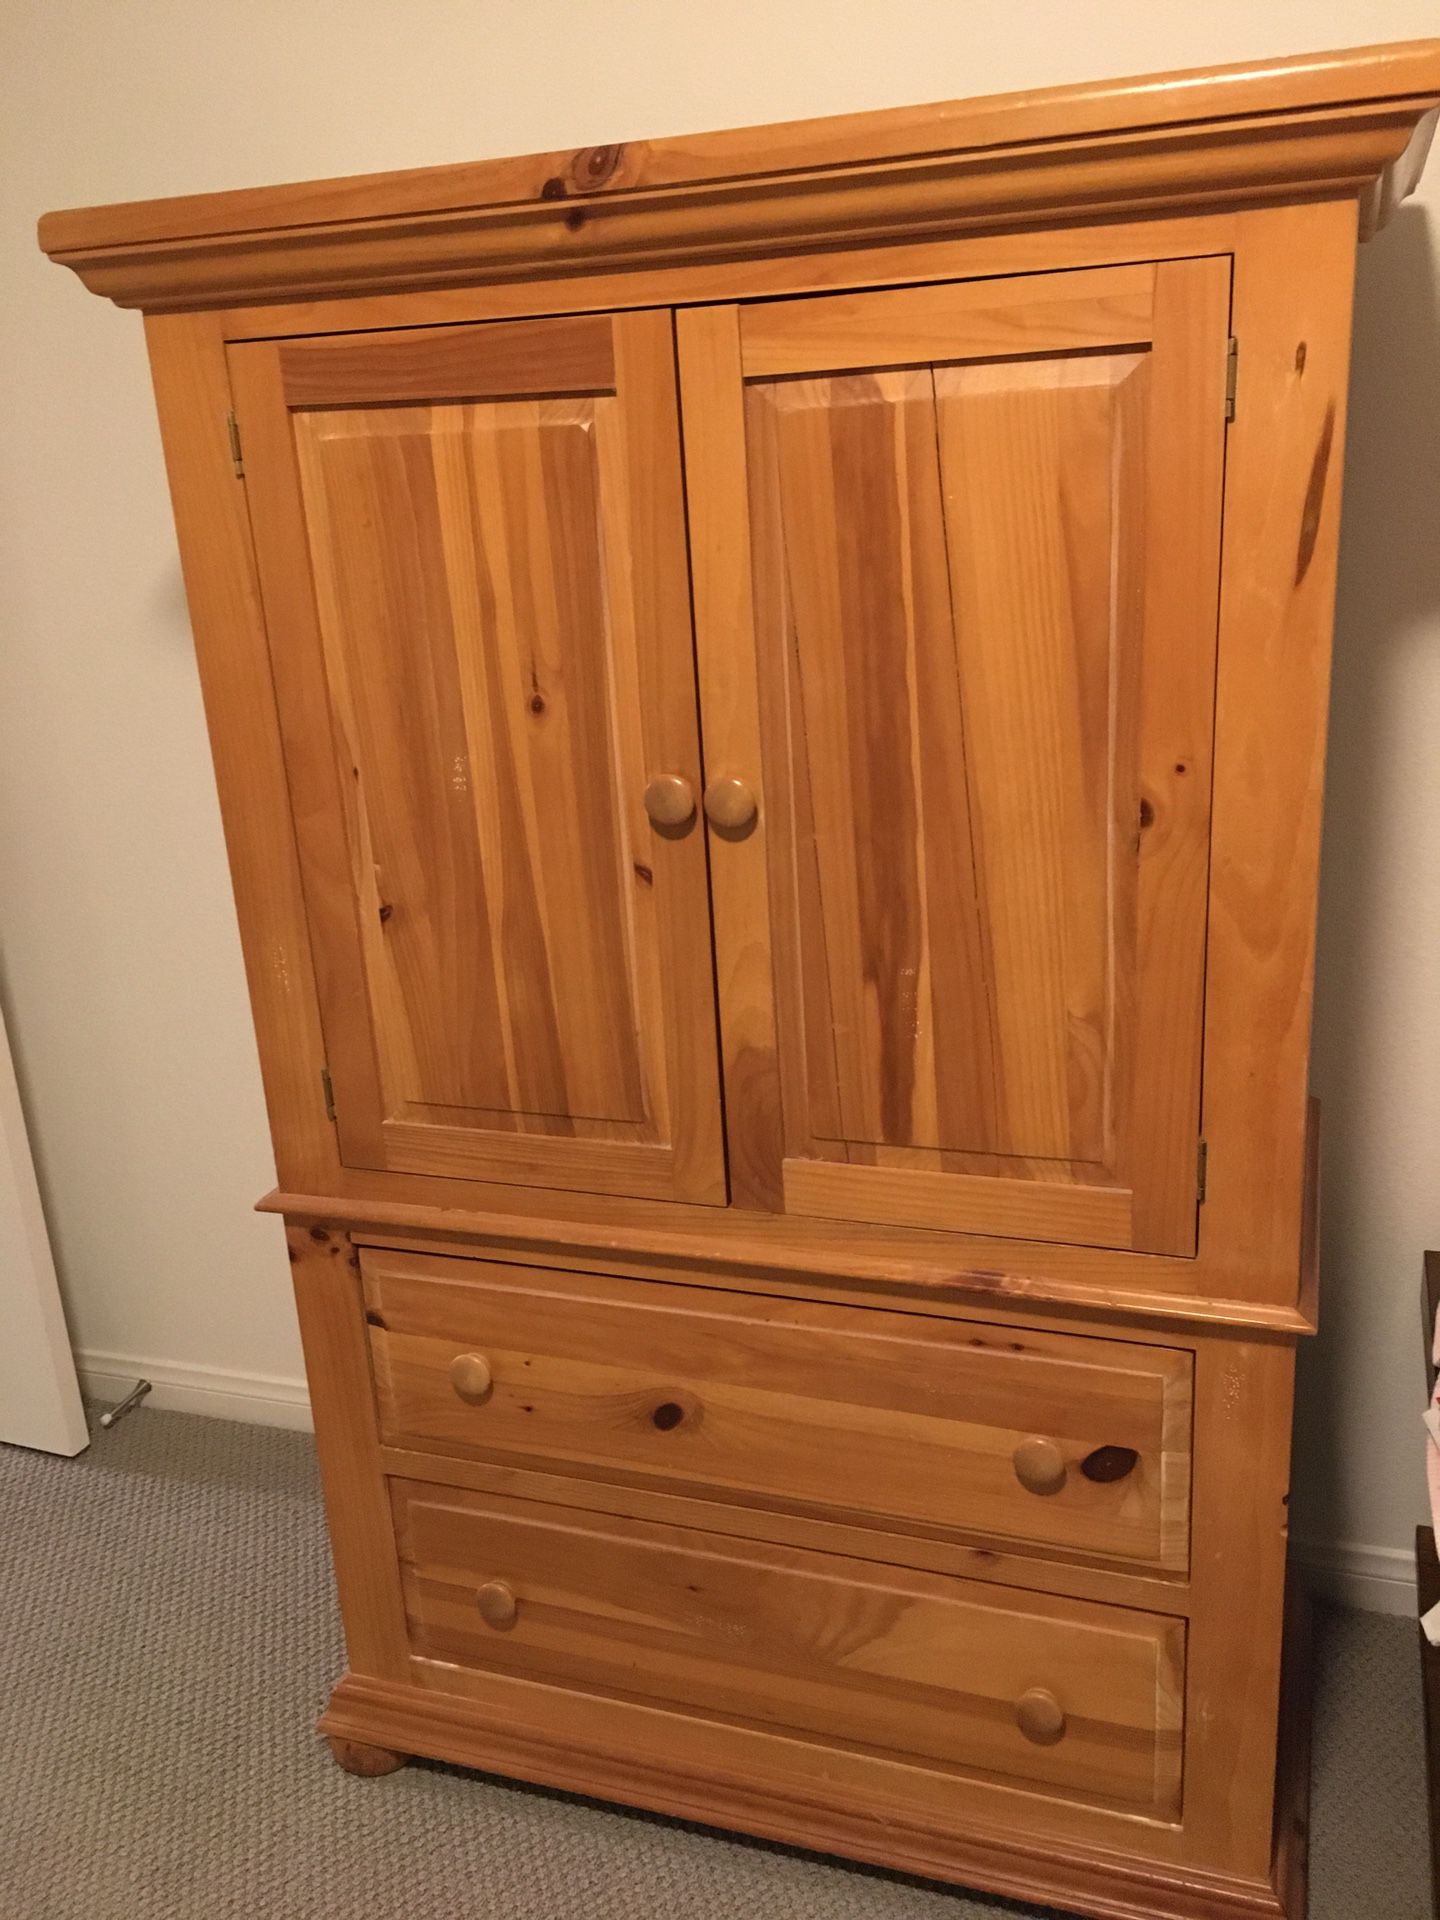 Make Offer - Broyhill Armoire - Solid Wood - Well made